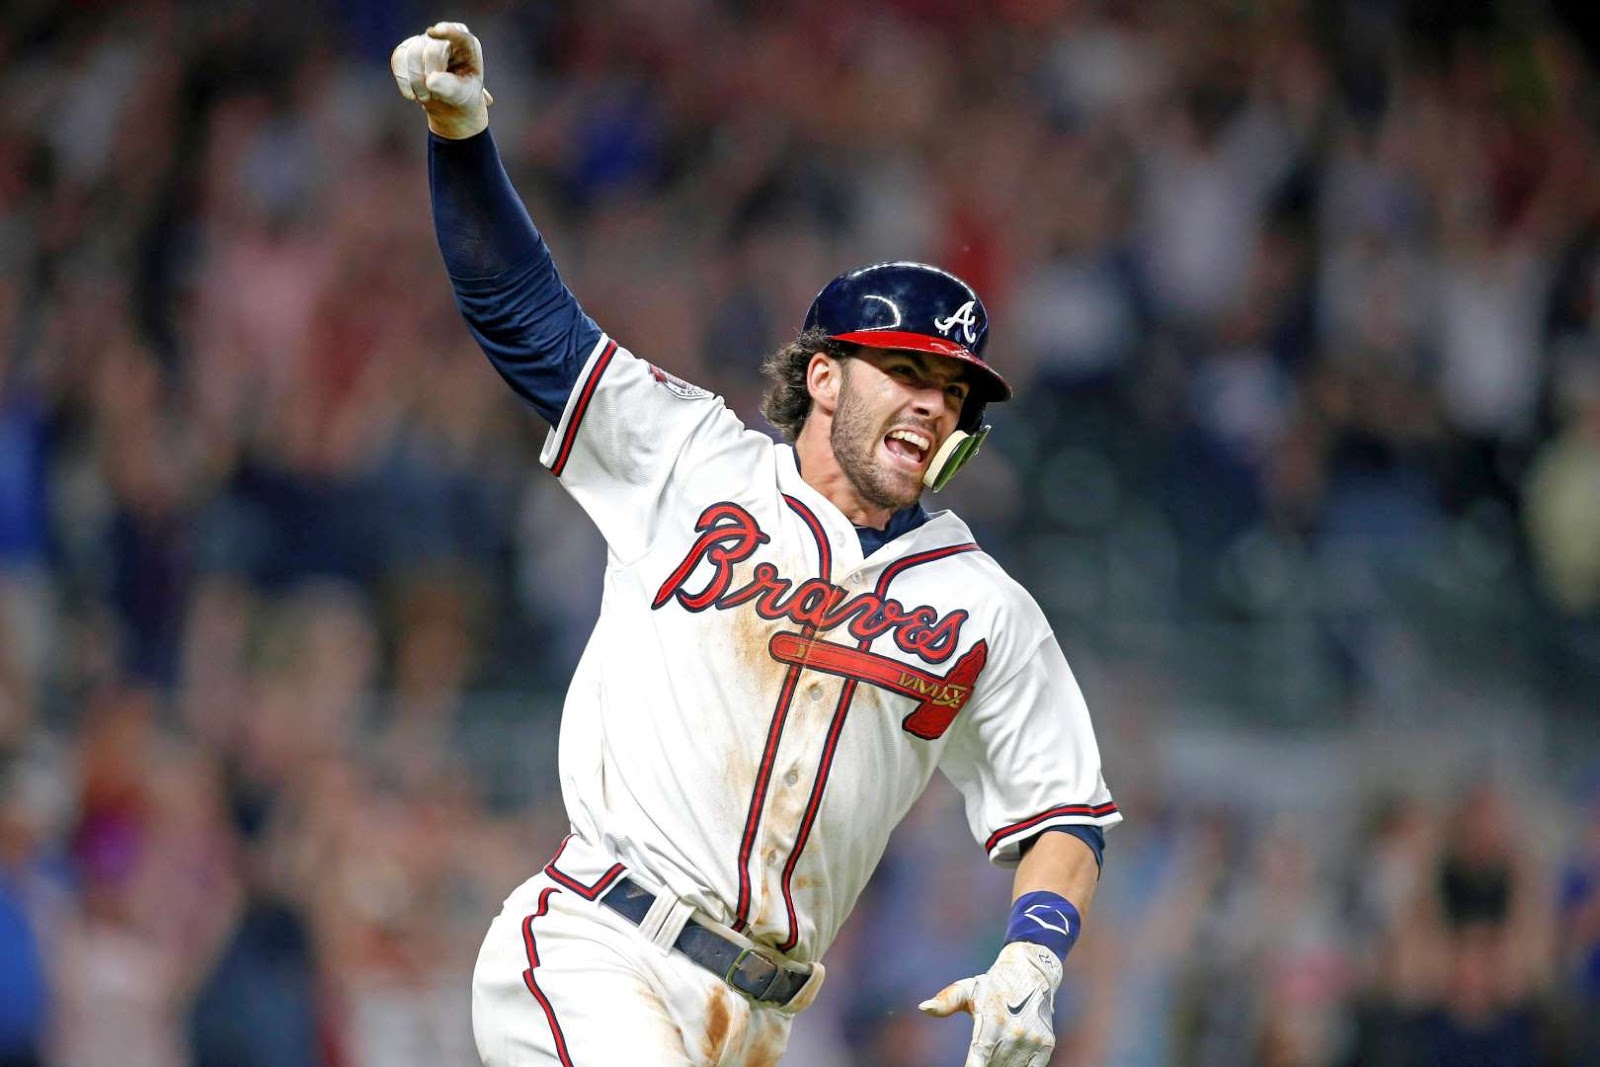 The Braves shortstop Dansby Swanson celebrates a walk-off single against th...